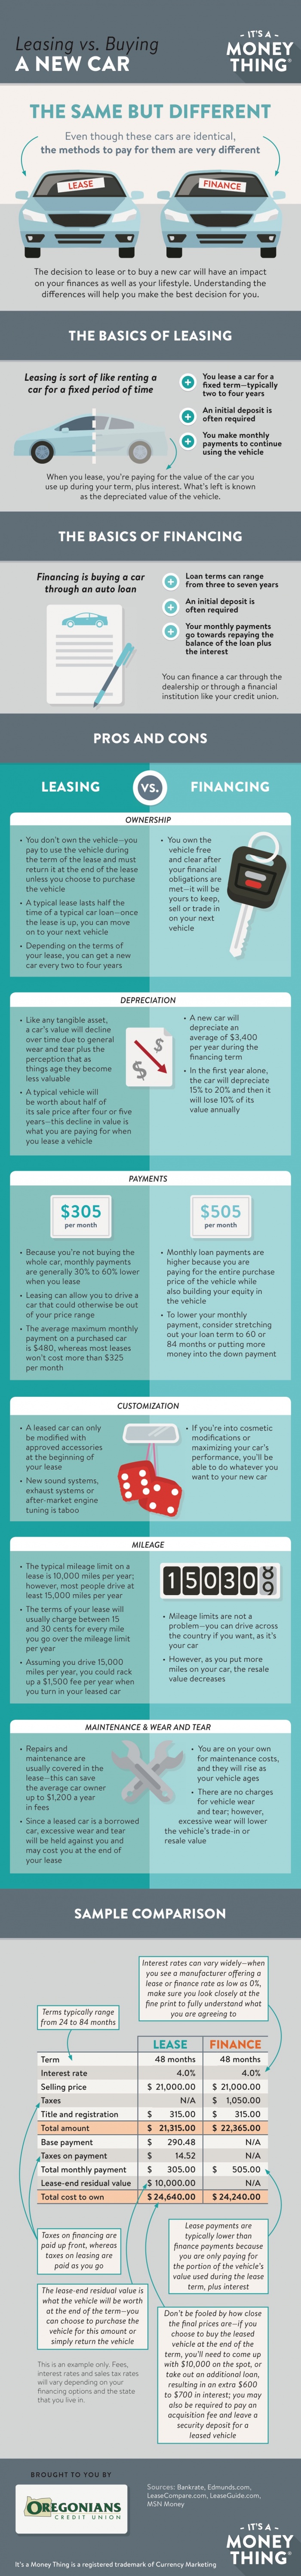 Leasing vs Financing infographic